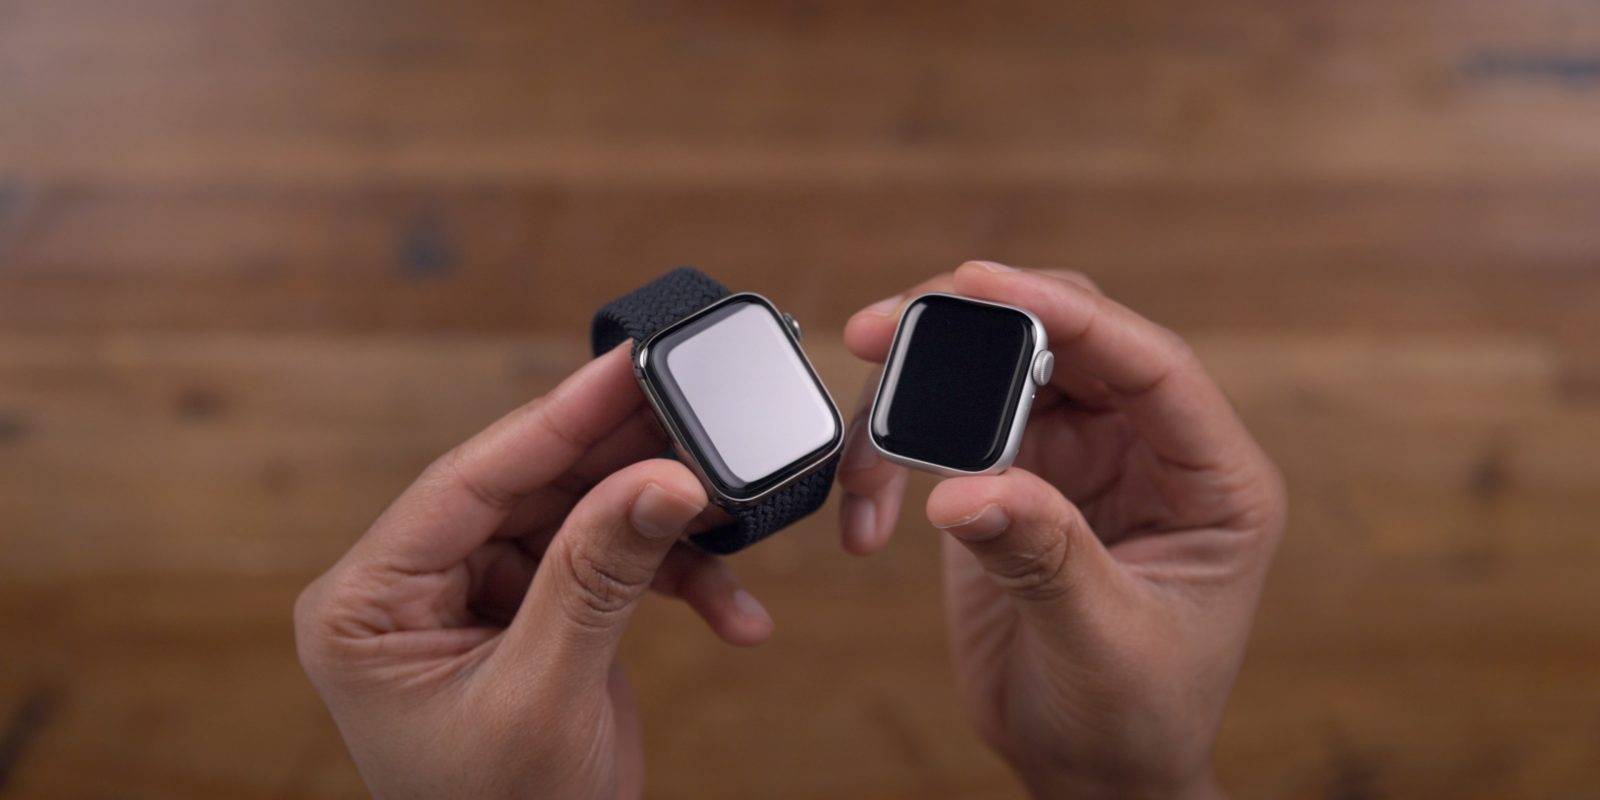 What-Apple-Watch-Should-You-Buy-Series-6-vs-SE